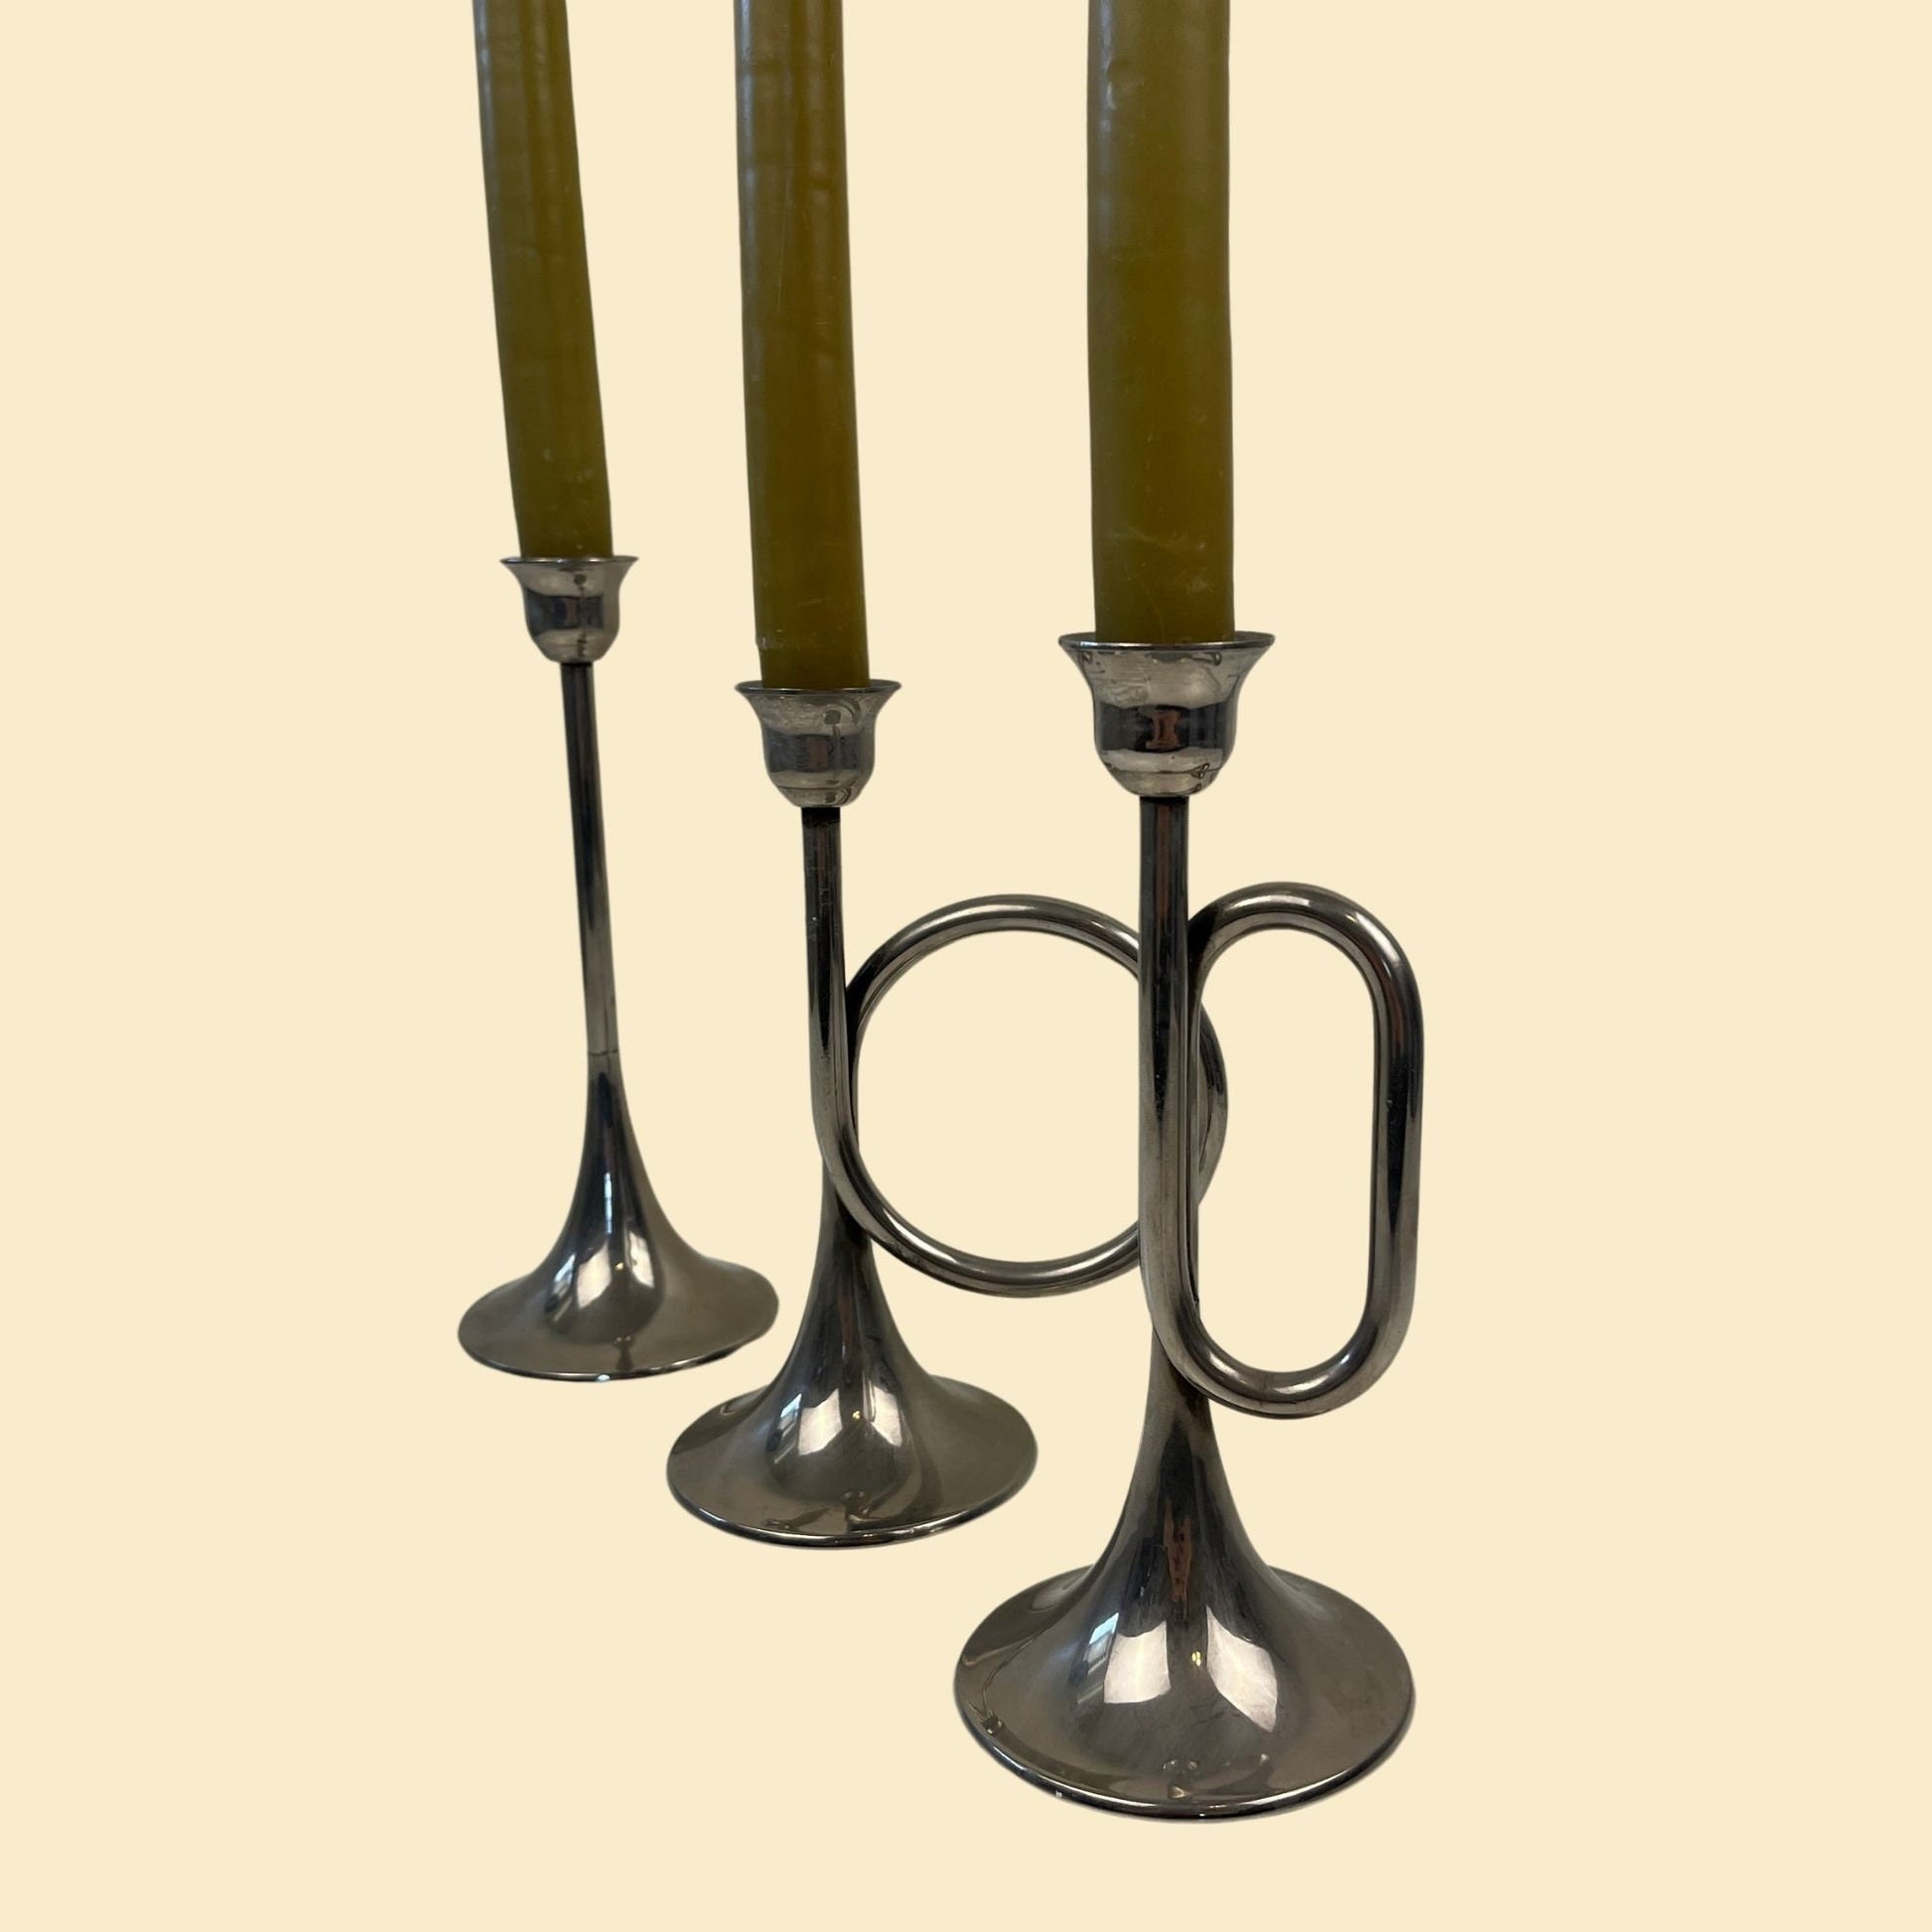 Set of 1980s instrument candlestick holders, vintage silver plated trumpet and bugle taper candle holders